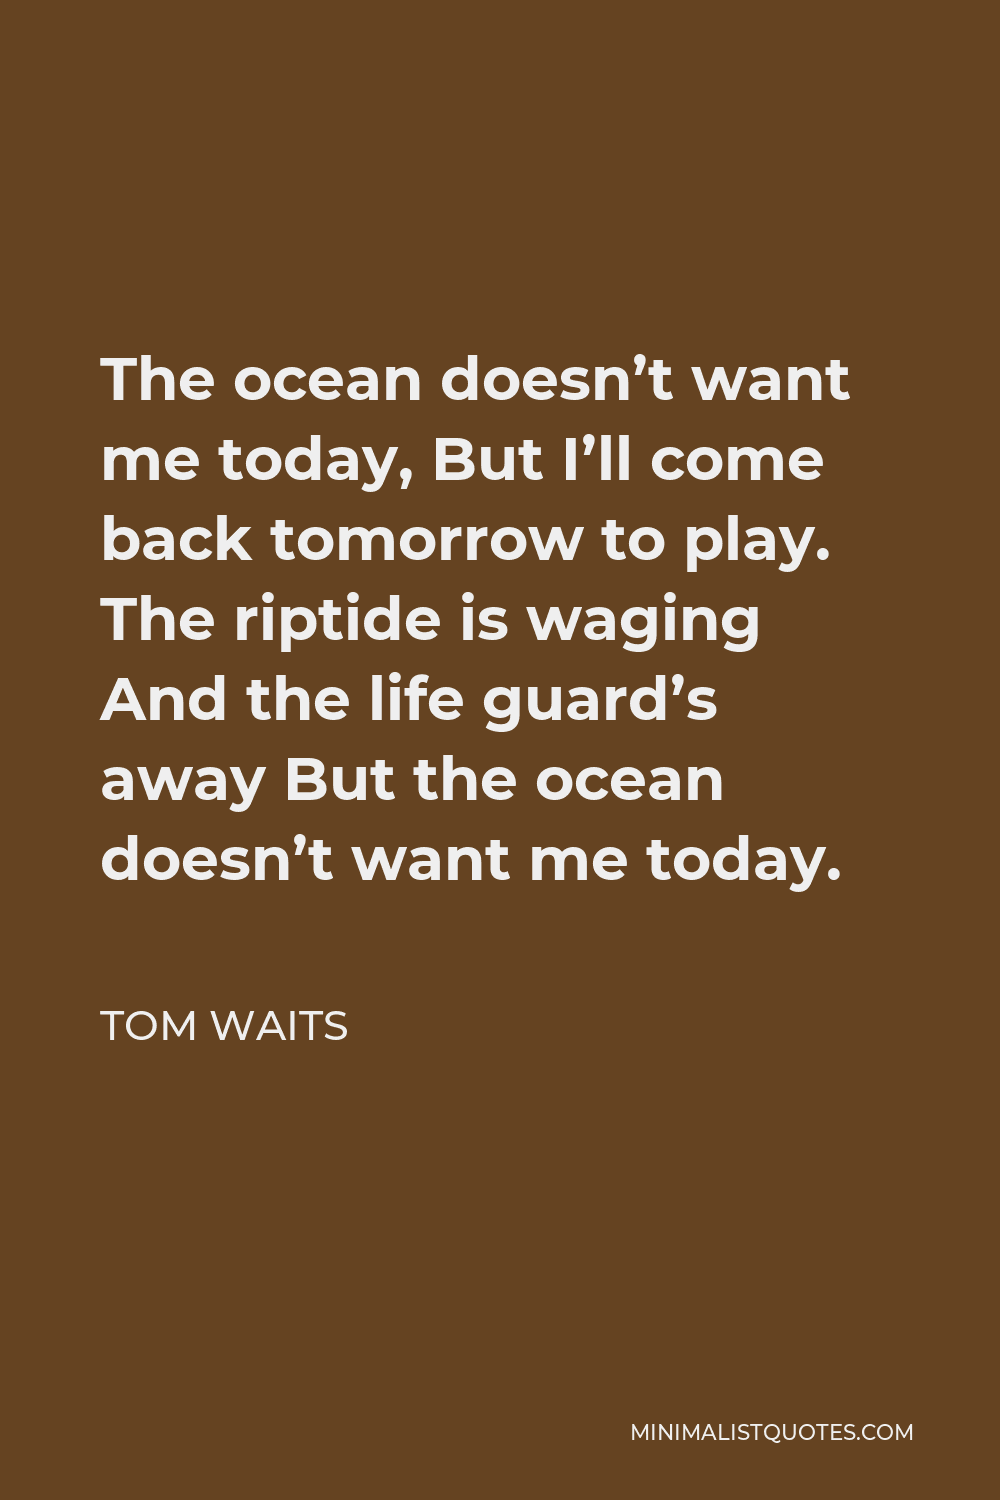 Tom Waits Quote - The ocean doesn’t want me today, But I’ll come back tomorrow to play. The riptide is waging And the life guard’s away But the ocean doesn’t want me today.